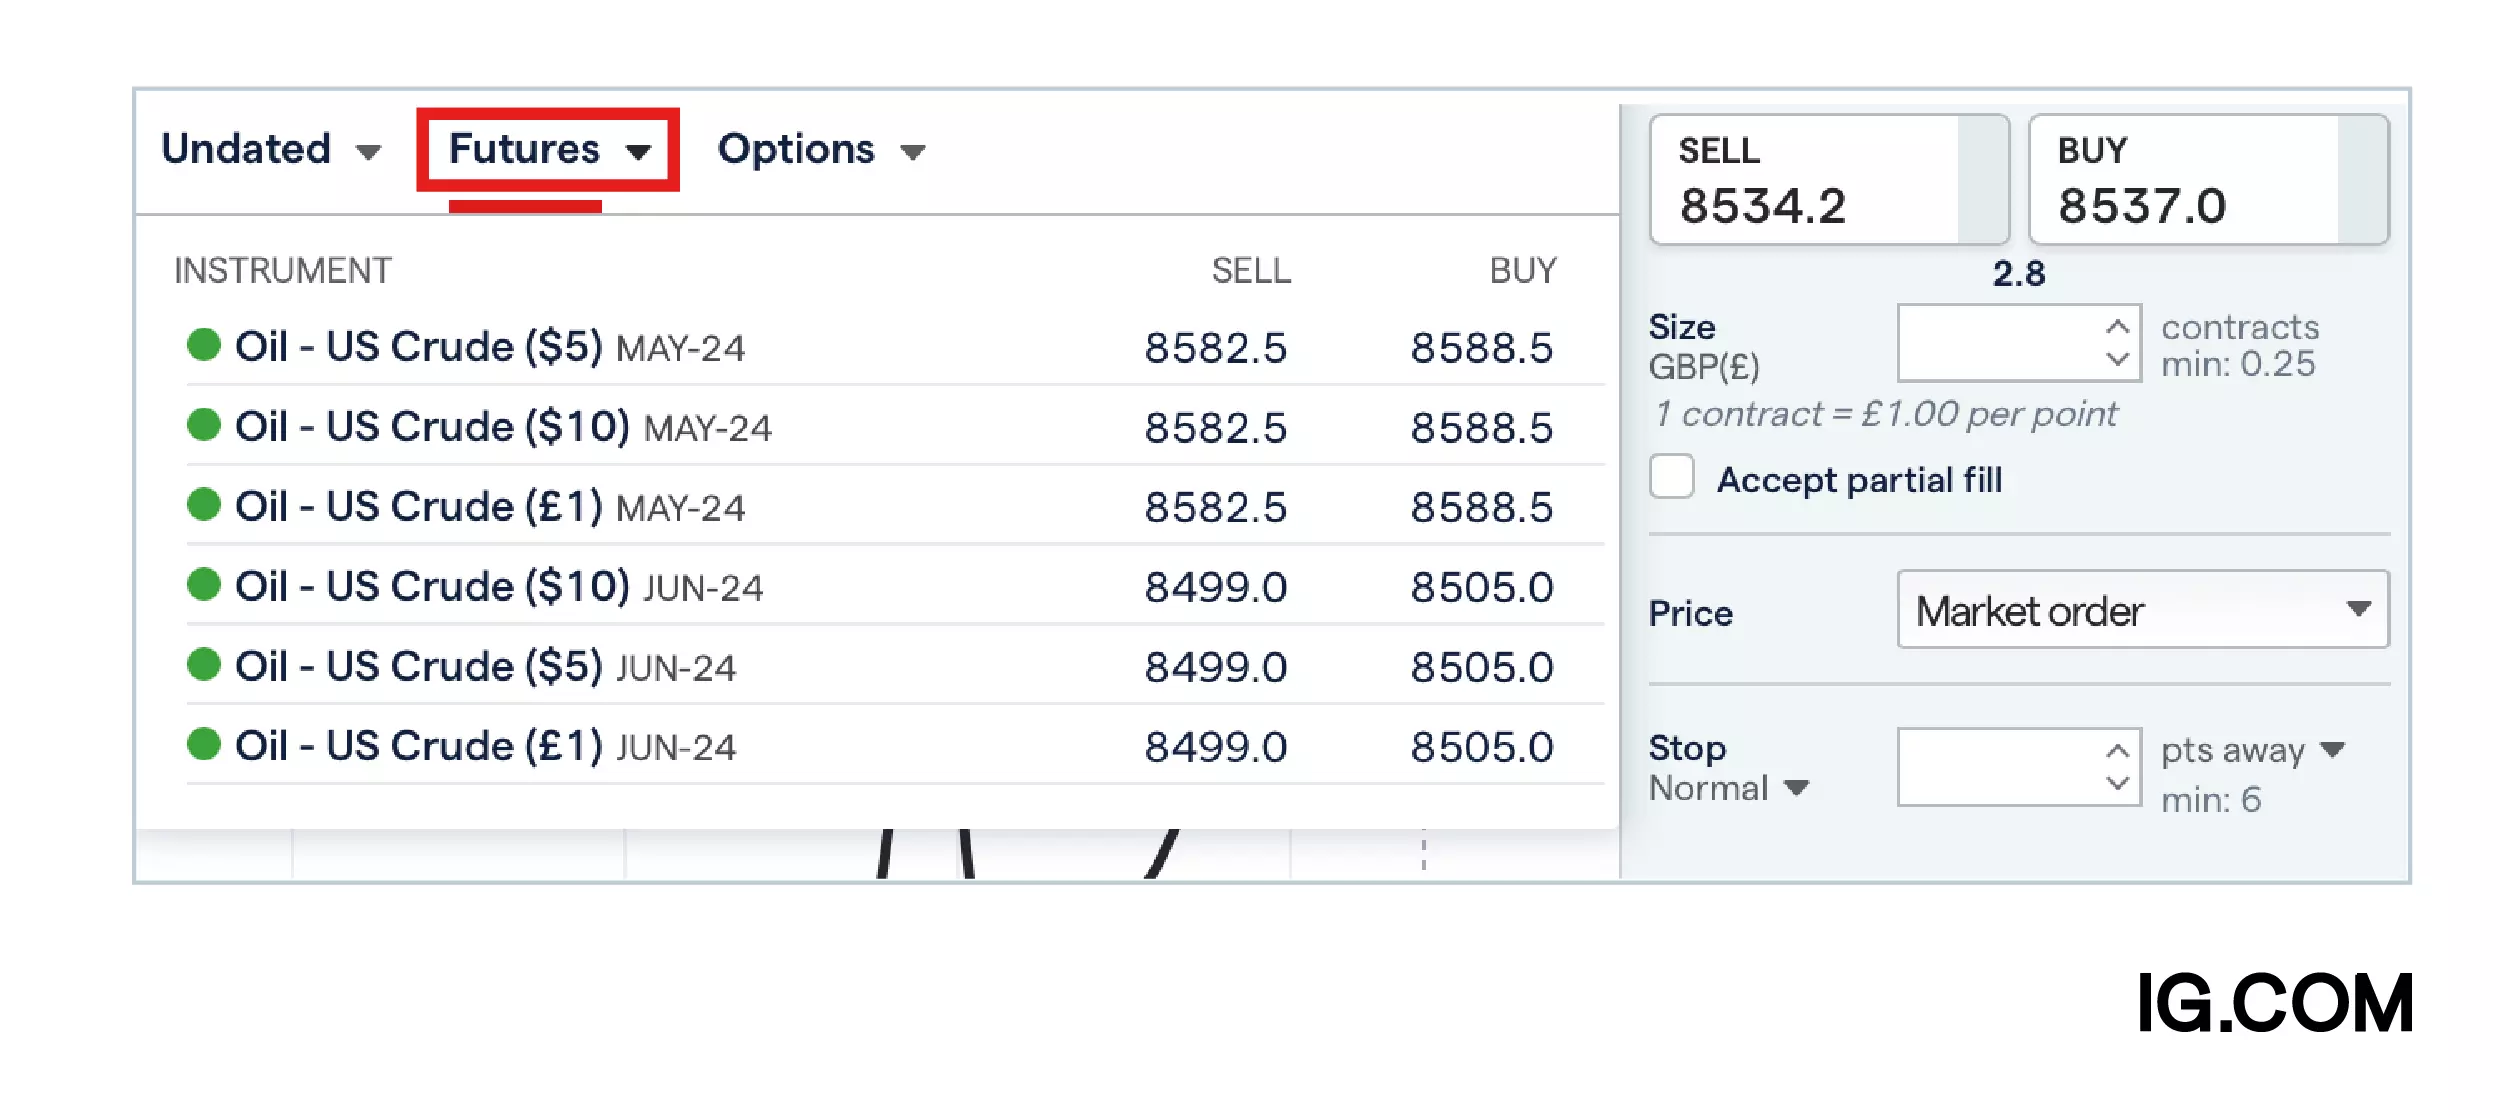 Futures contract trading example